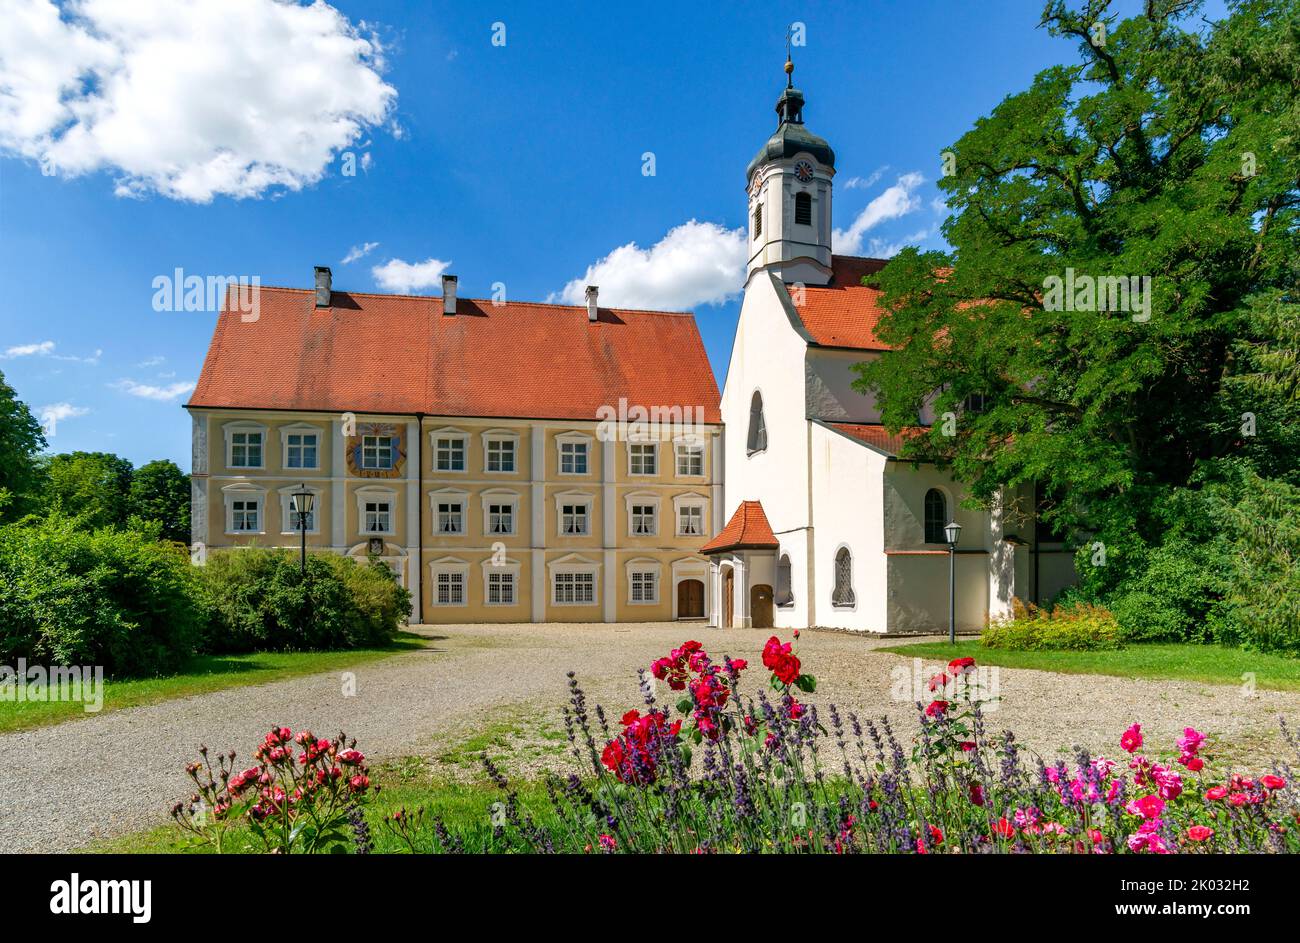 The former Imperial Abbey of Gutenzell was an imperial Cistercian monastery founded in 1237 on the river Rot in the present-day community of Gutenzell-Hürbel in the Upper Swabian district of Biberach. Stock Photo